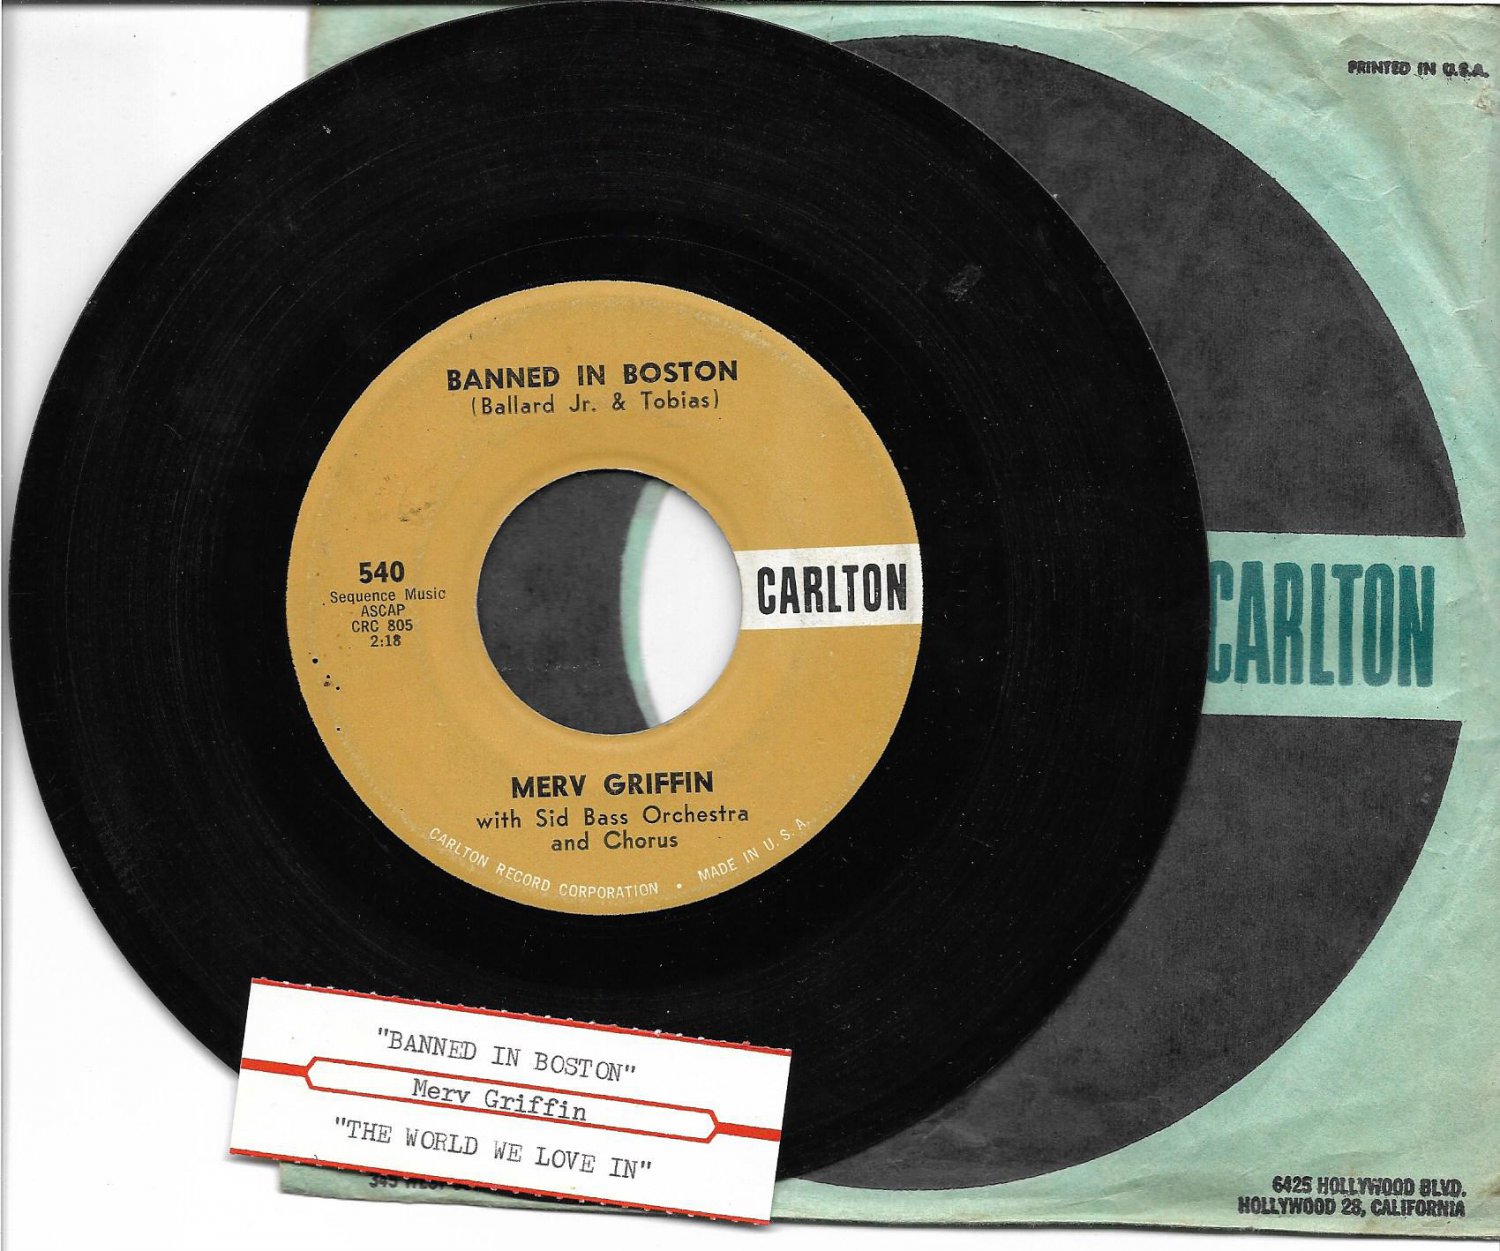 Merv Griffin: "Banned In Boston" / "The World We Love In" - '61 hit - plays well!